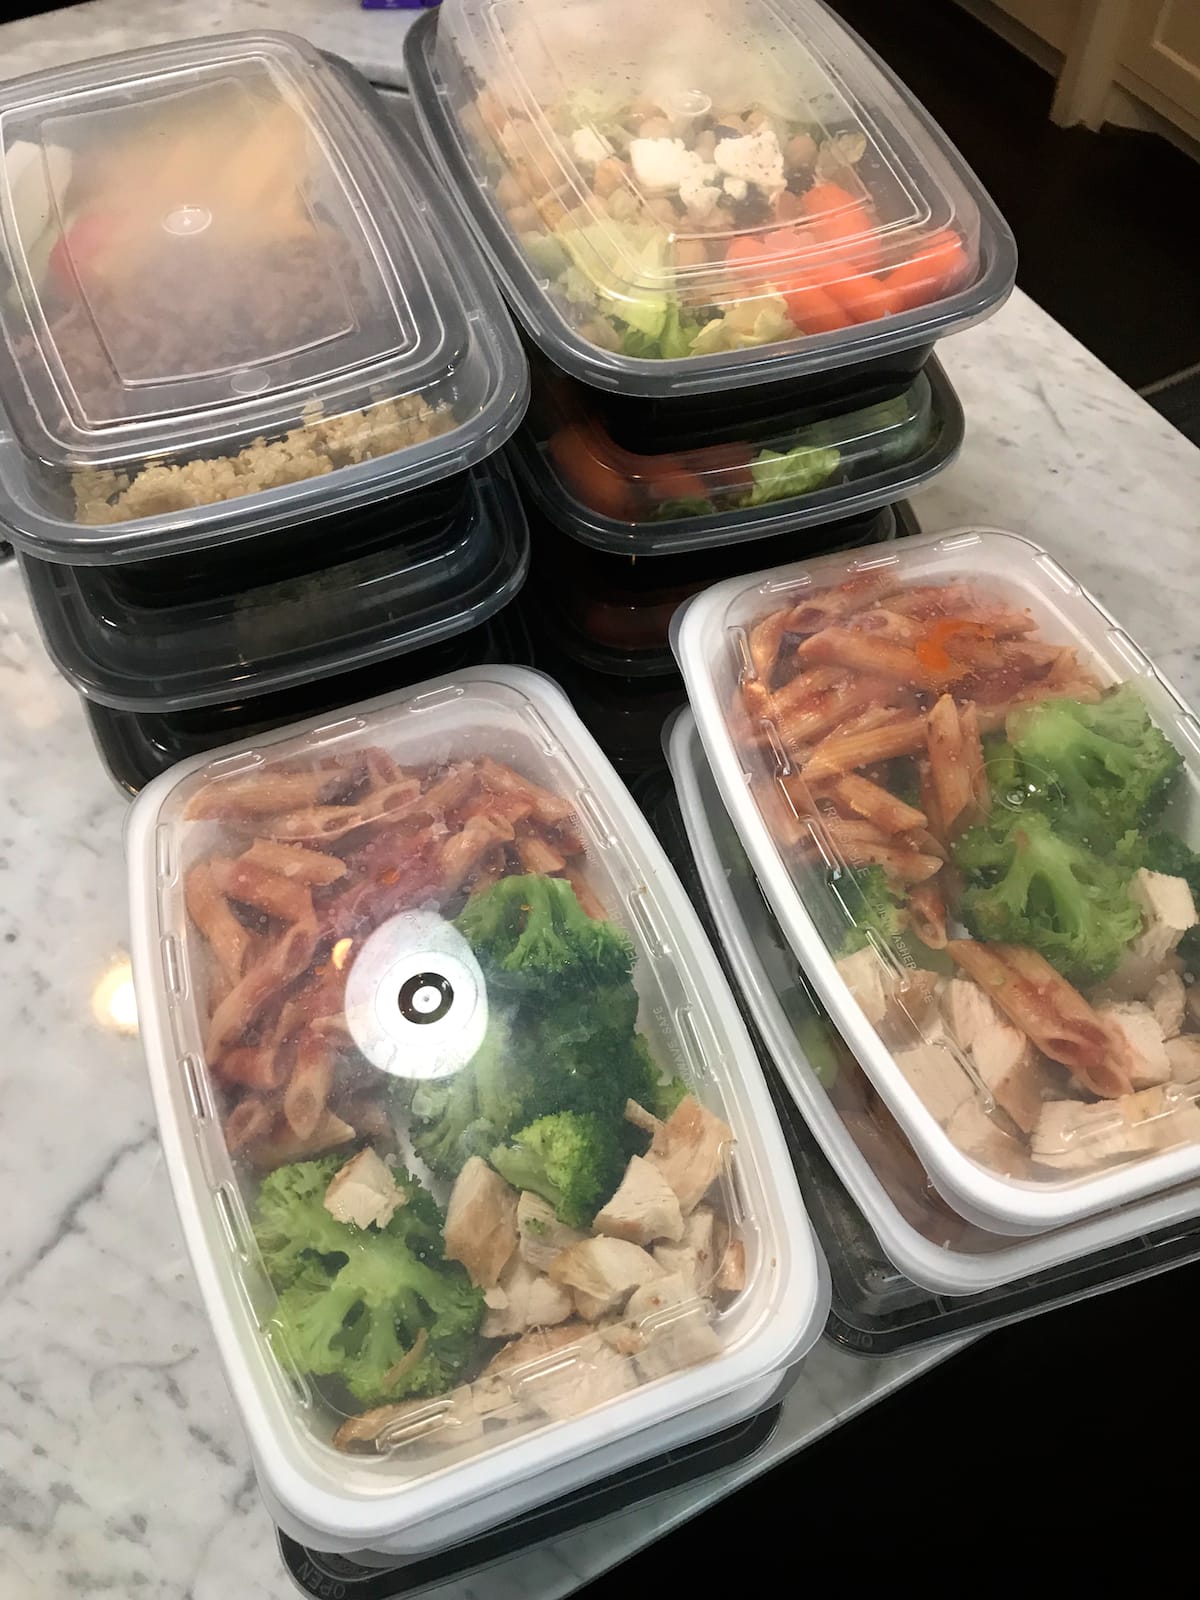 How to Meal Prep for the Week